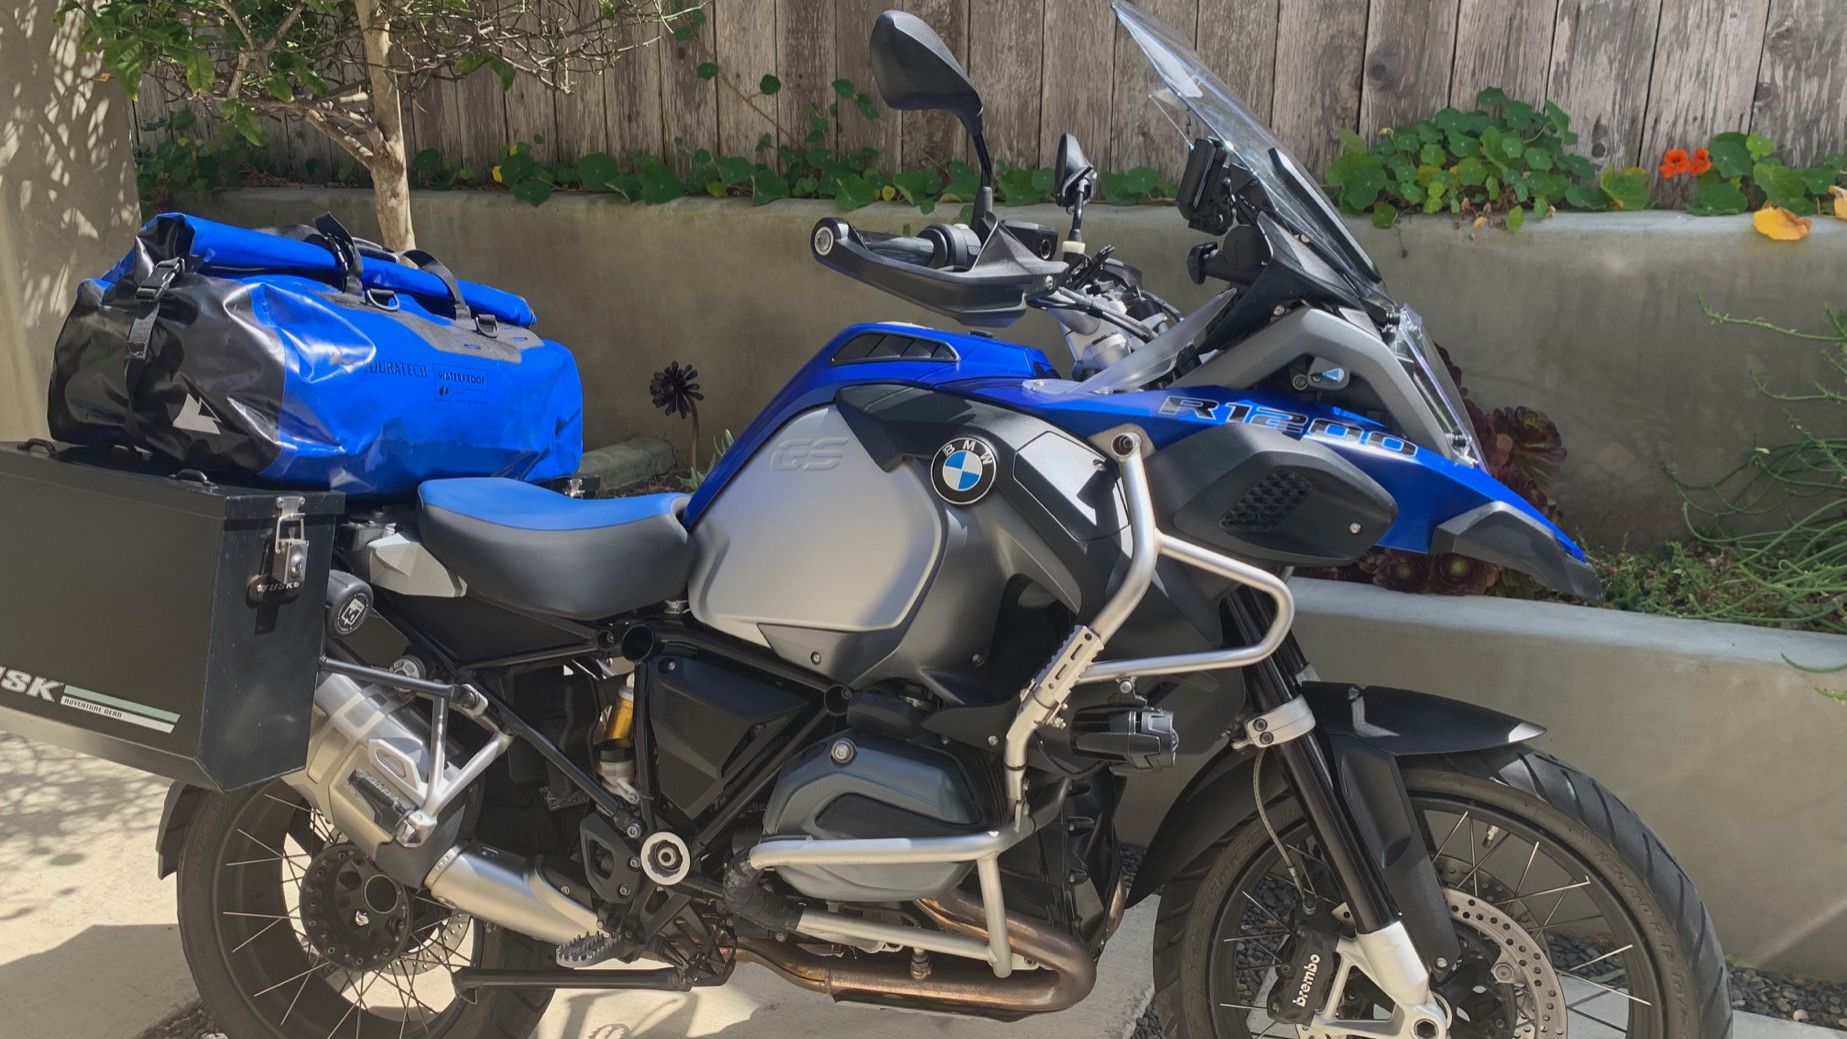 Motorcycle Rentals done right. Find BMW motorcycle's for rent near San